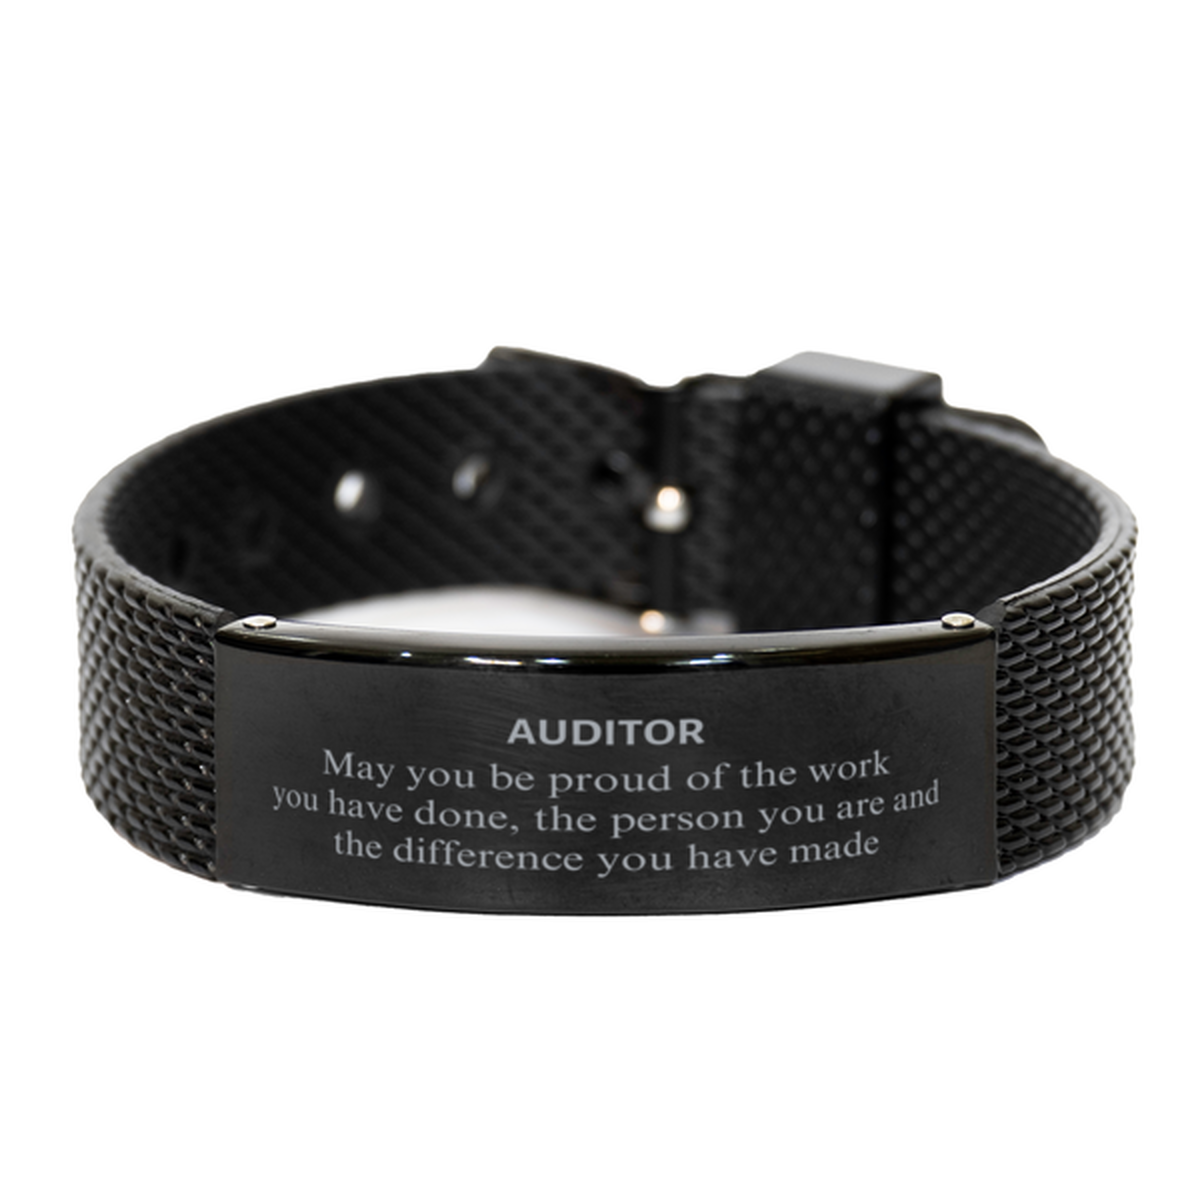 Auditor May you be proud of the work you have done, Retirement Auditor Black Shark Mesh Bracelet for Colleague Appreciation Gifts Amazing for Auditor